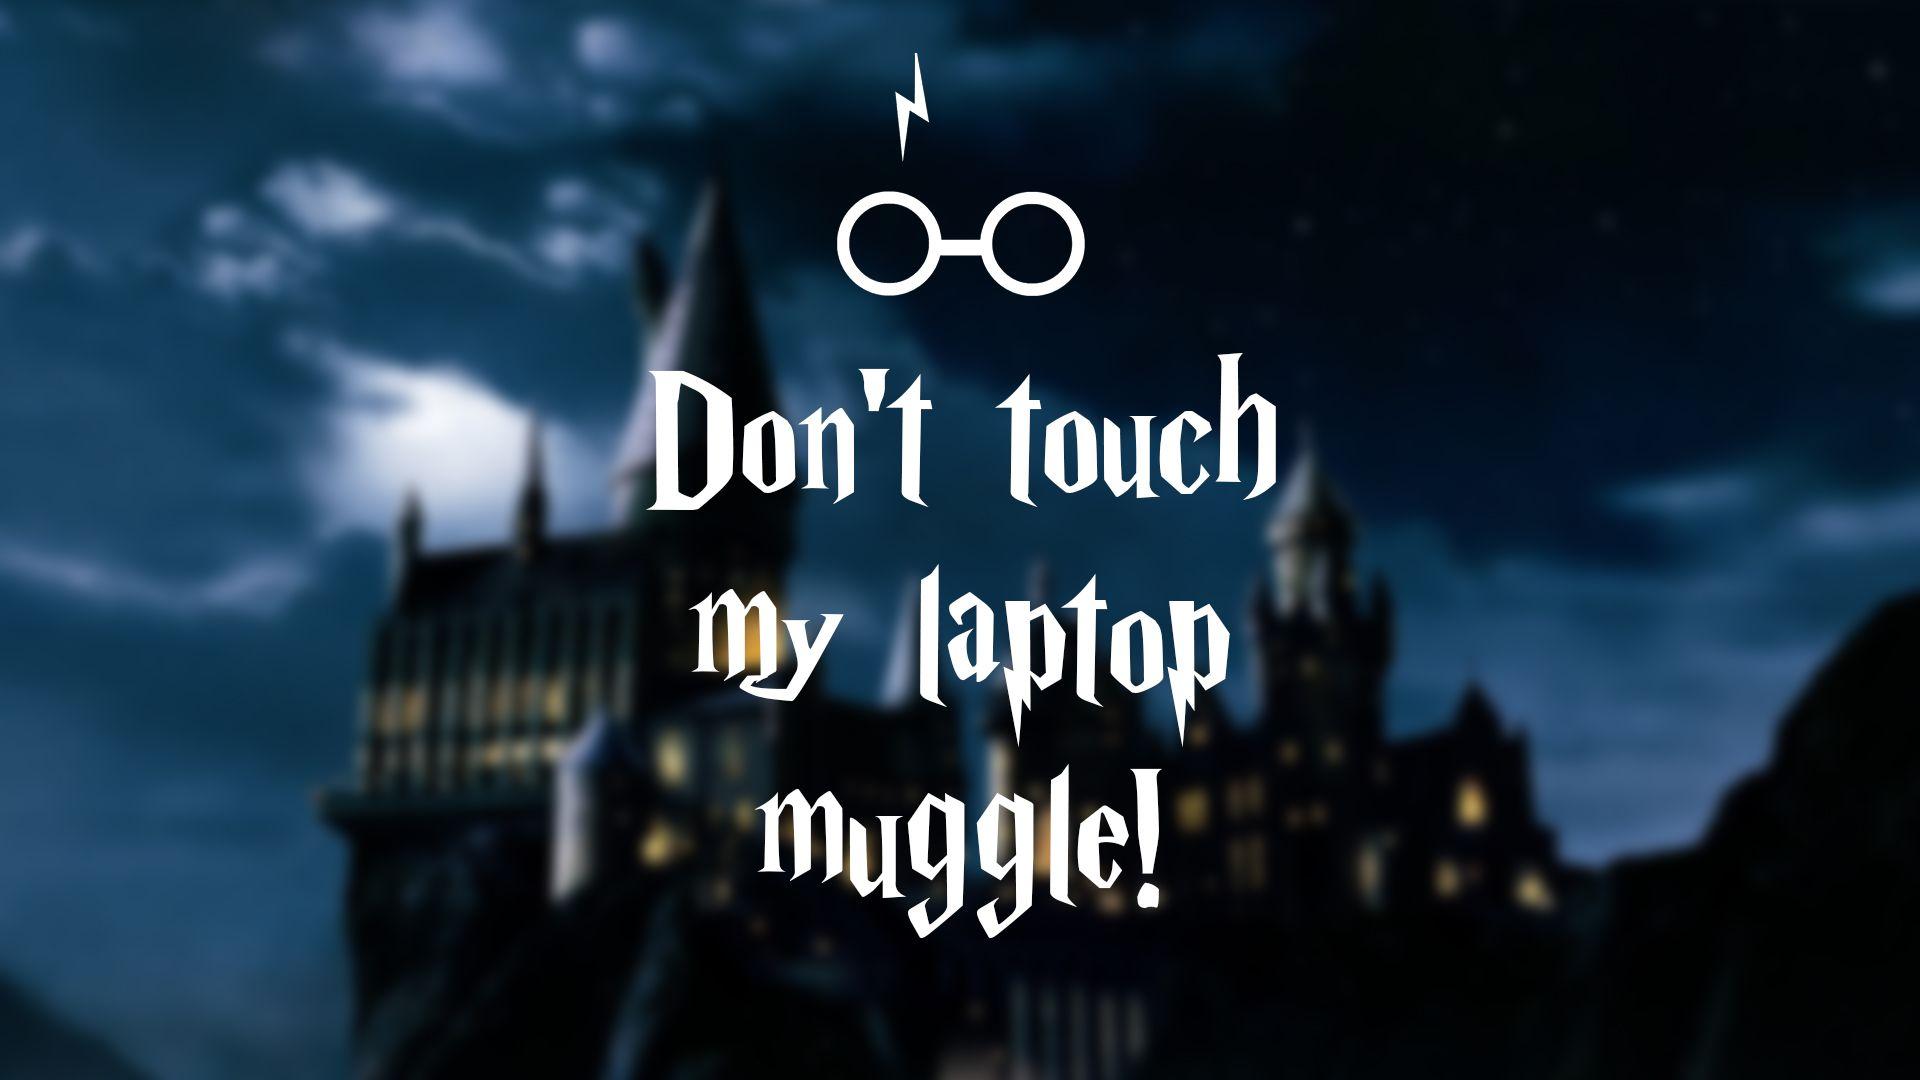 Harry Potter Muggle Wallpapers Top Free Harry Potter